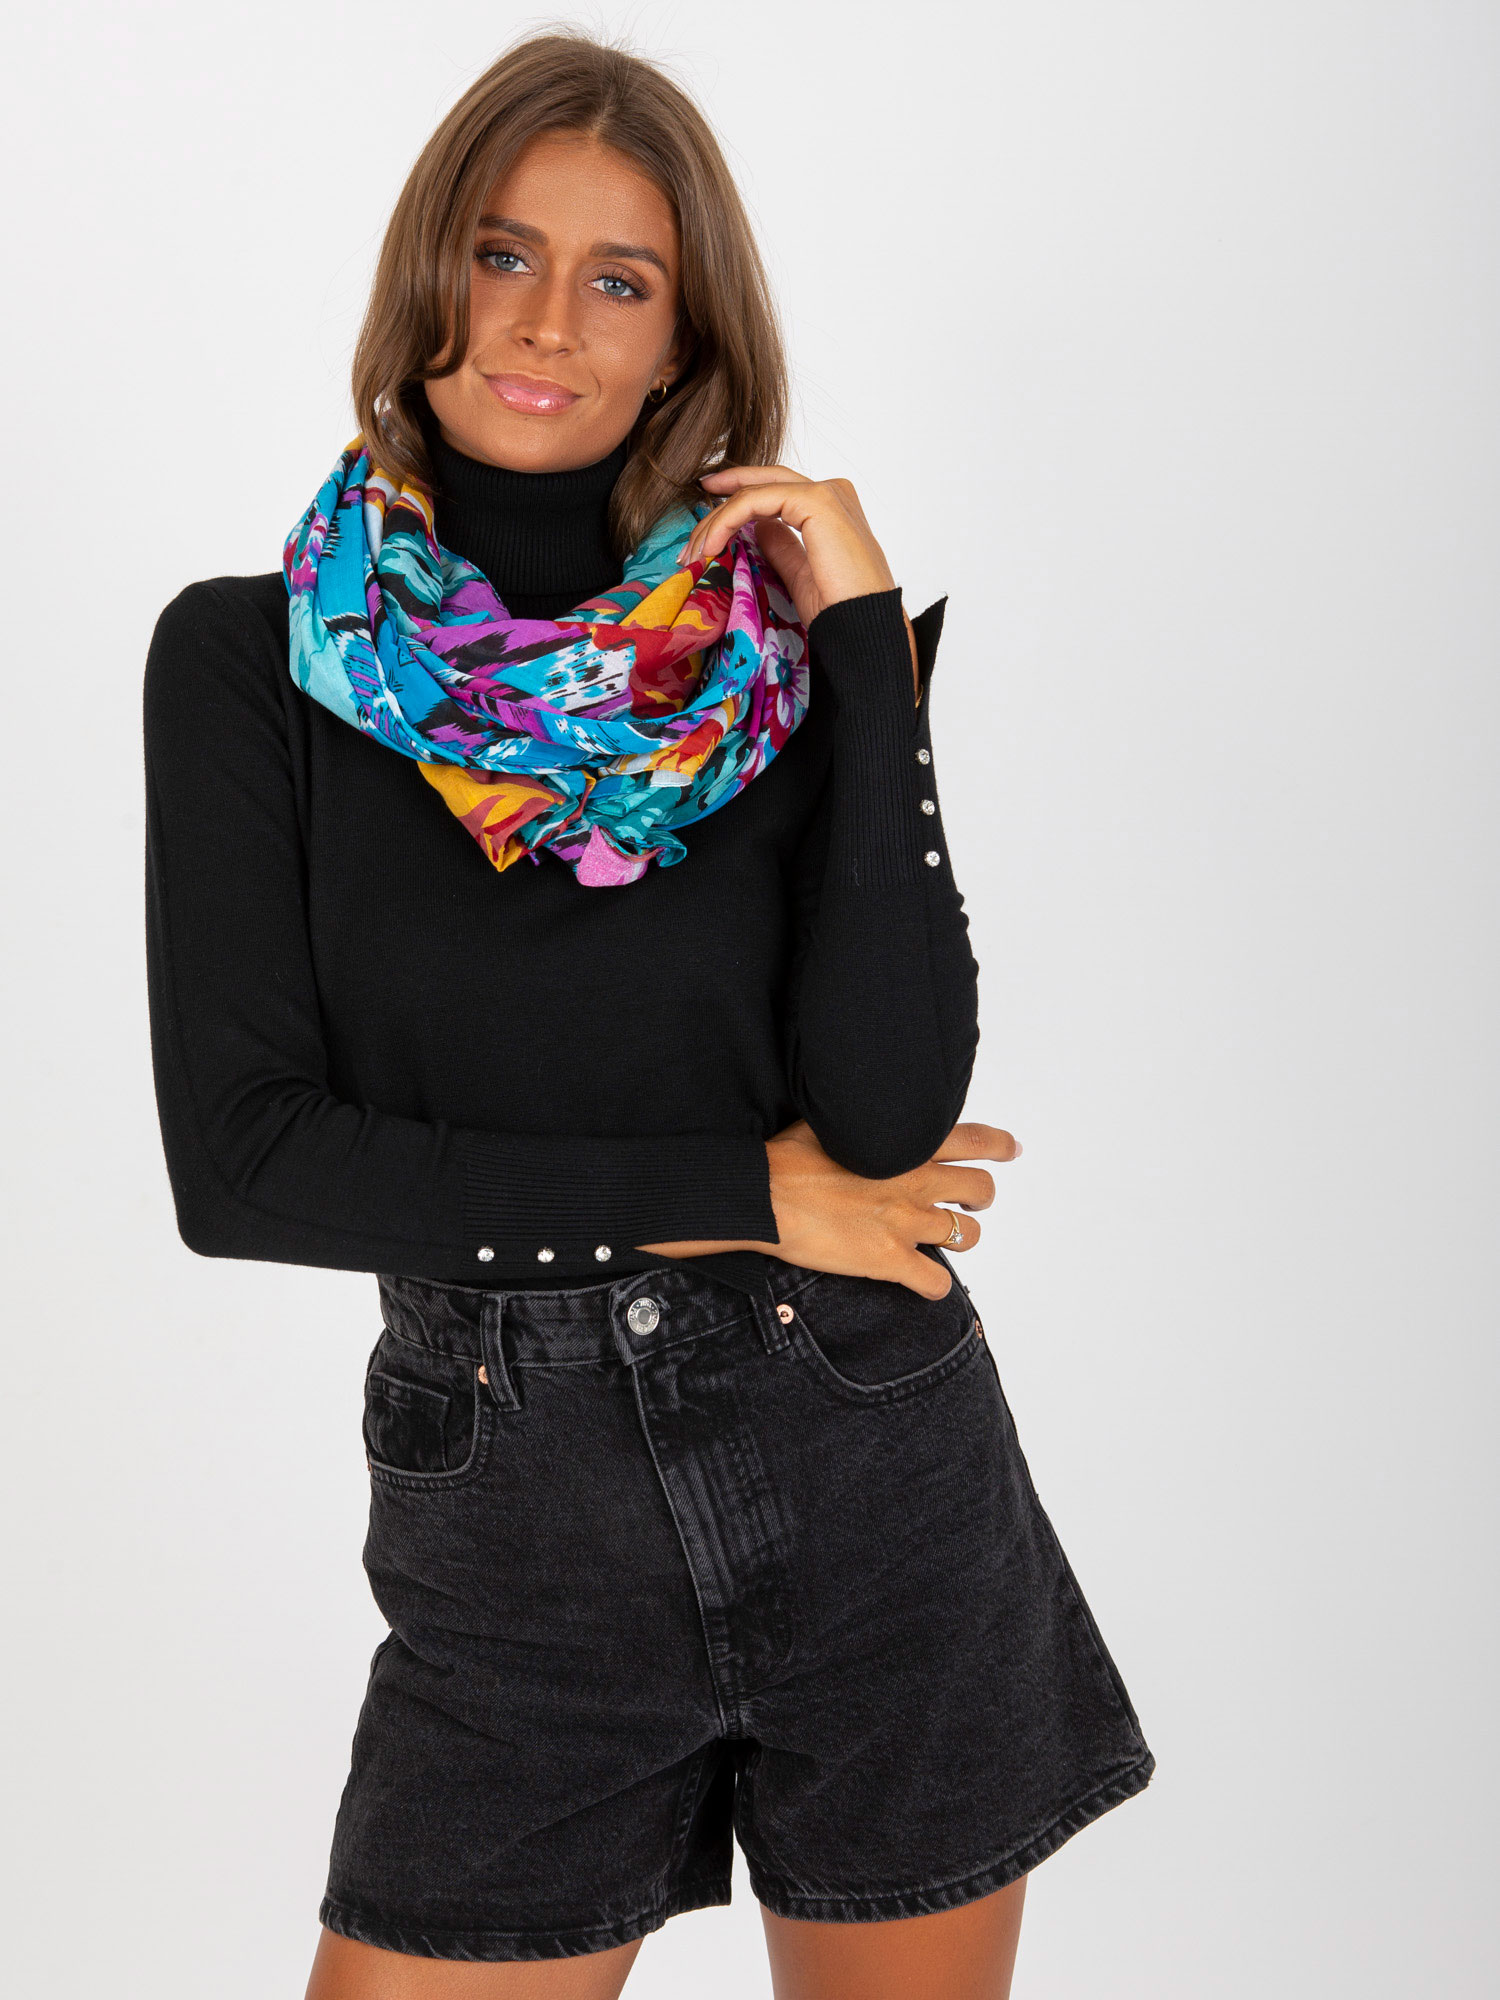 Women's turquoise and fuchsia floral scarf